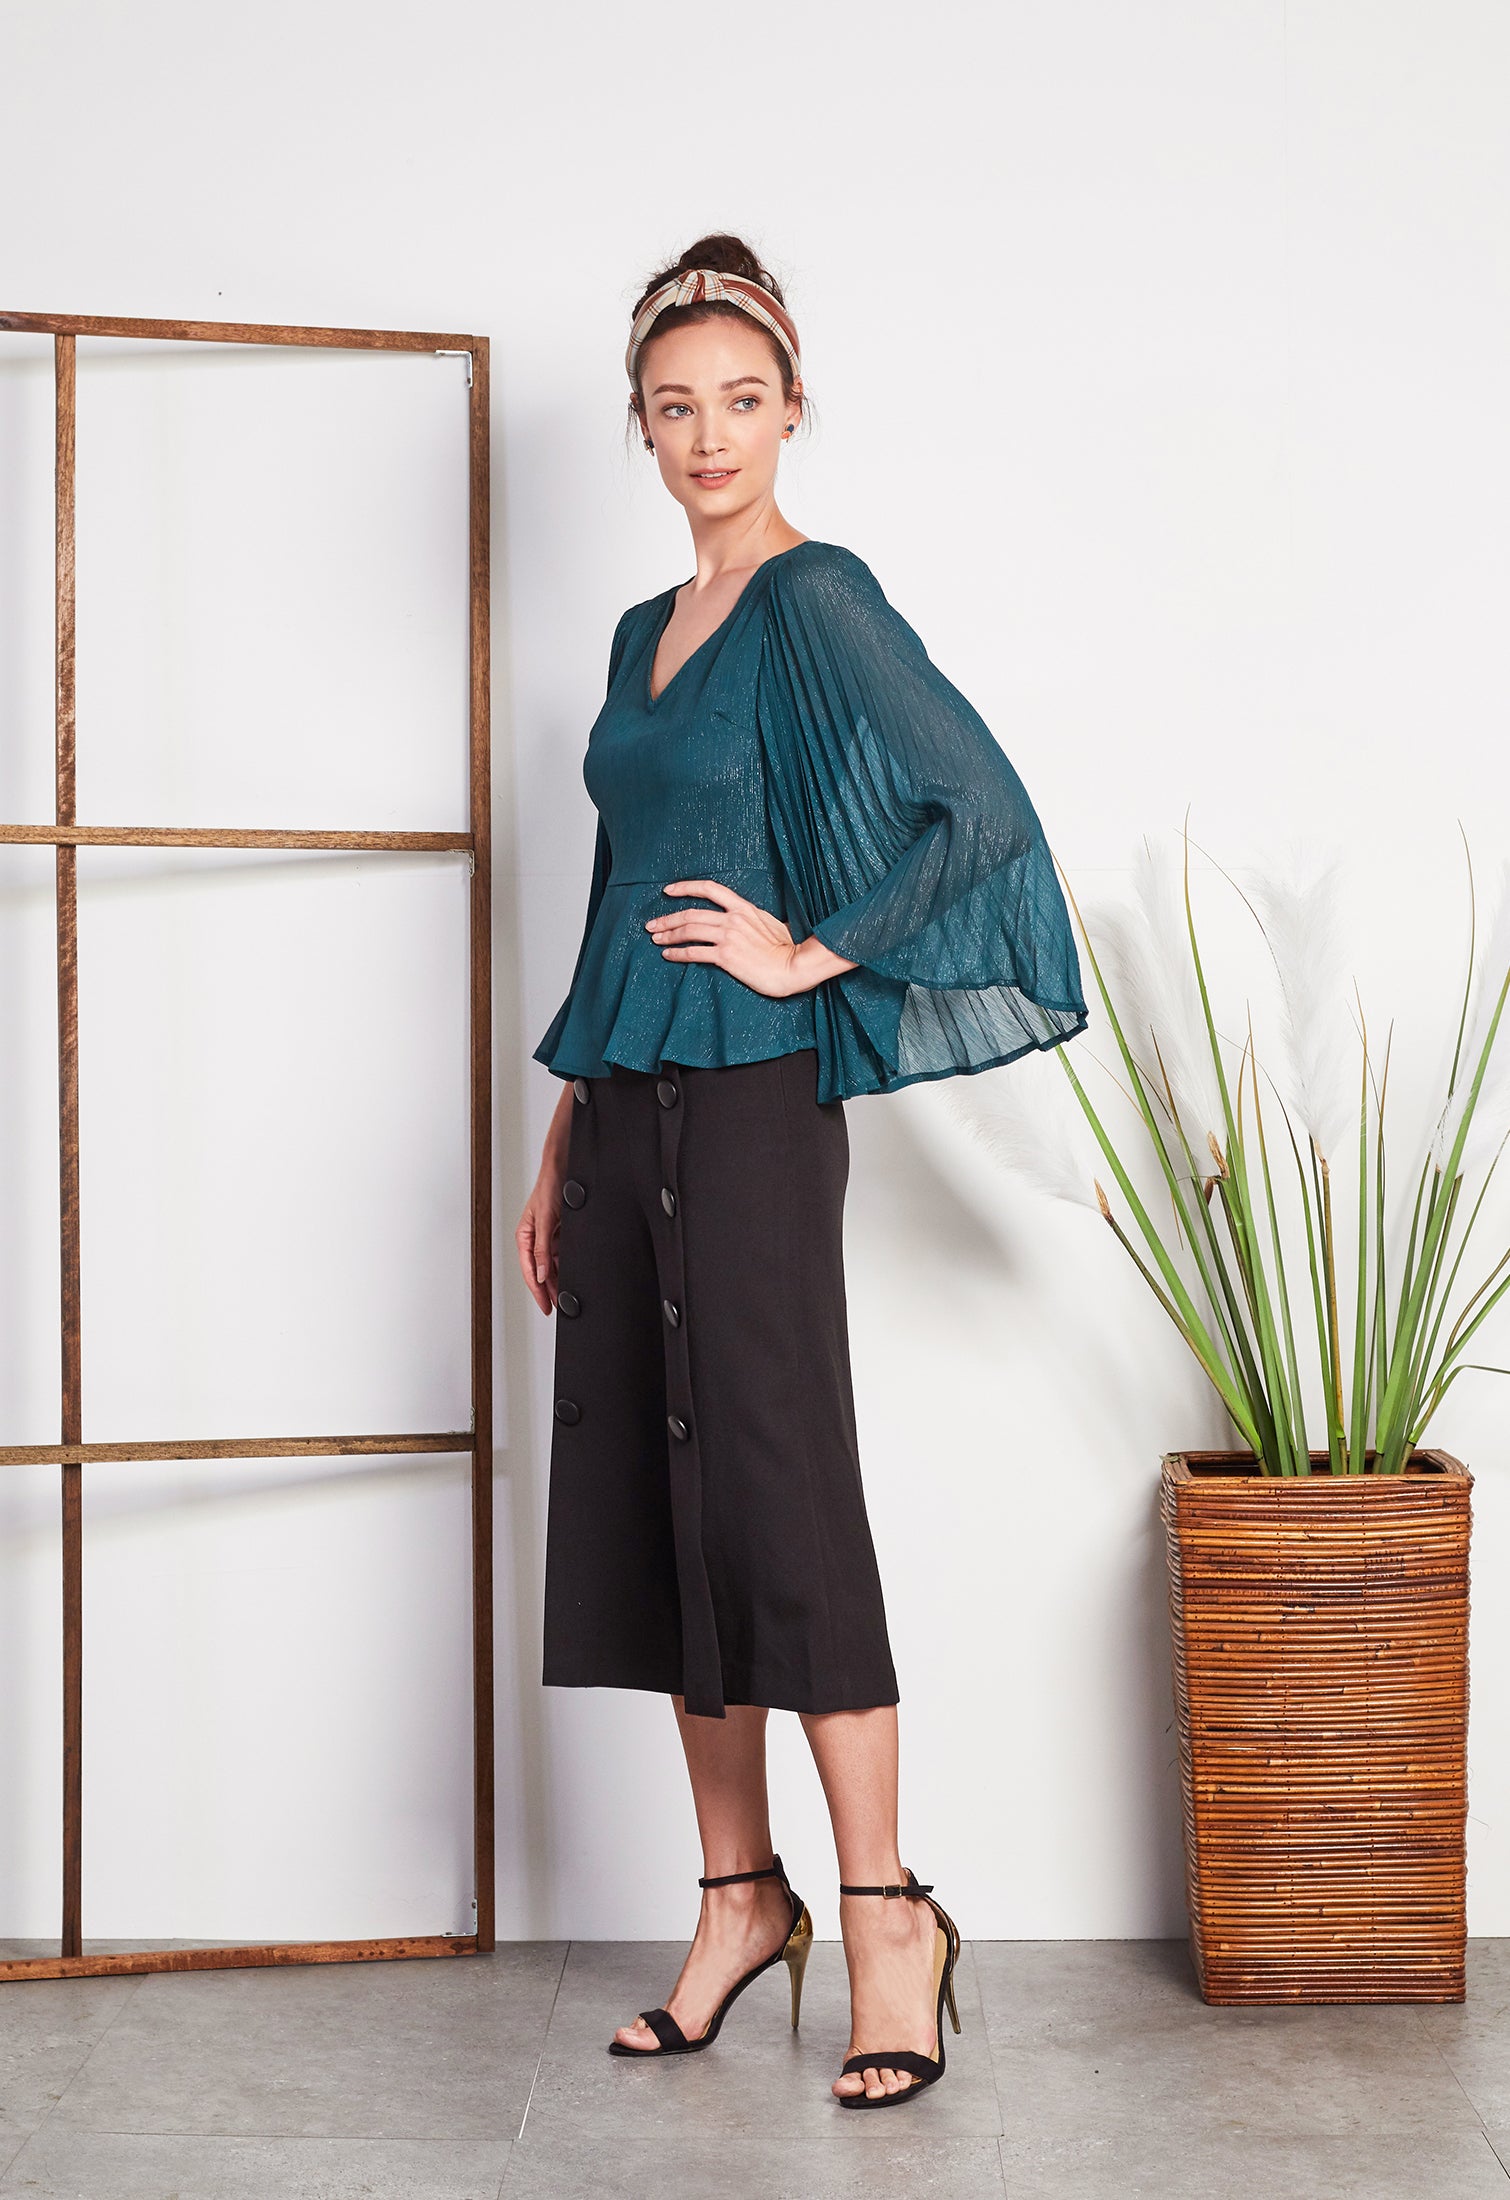 Pleated Batwing Organza Top